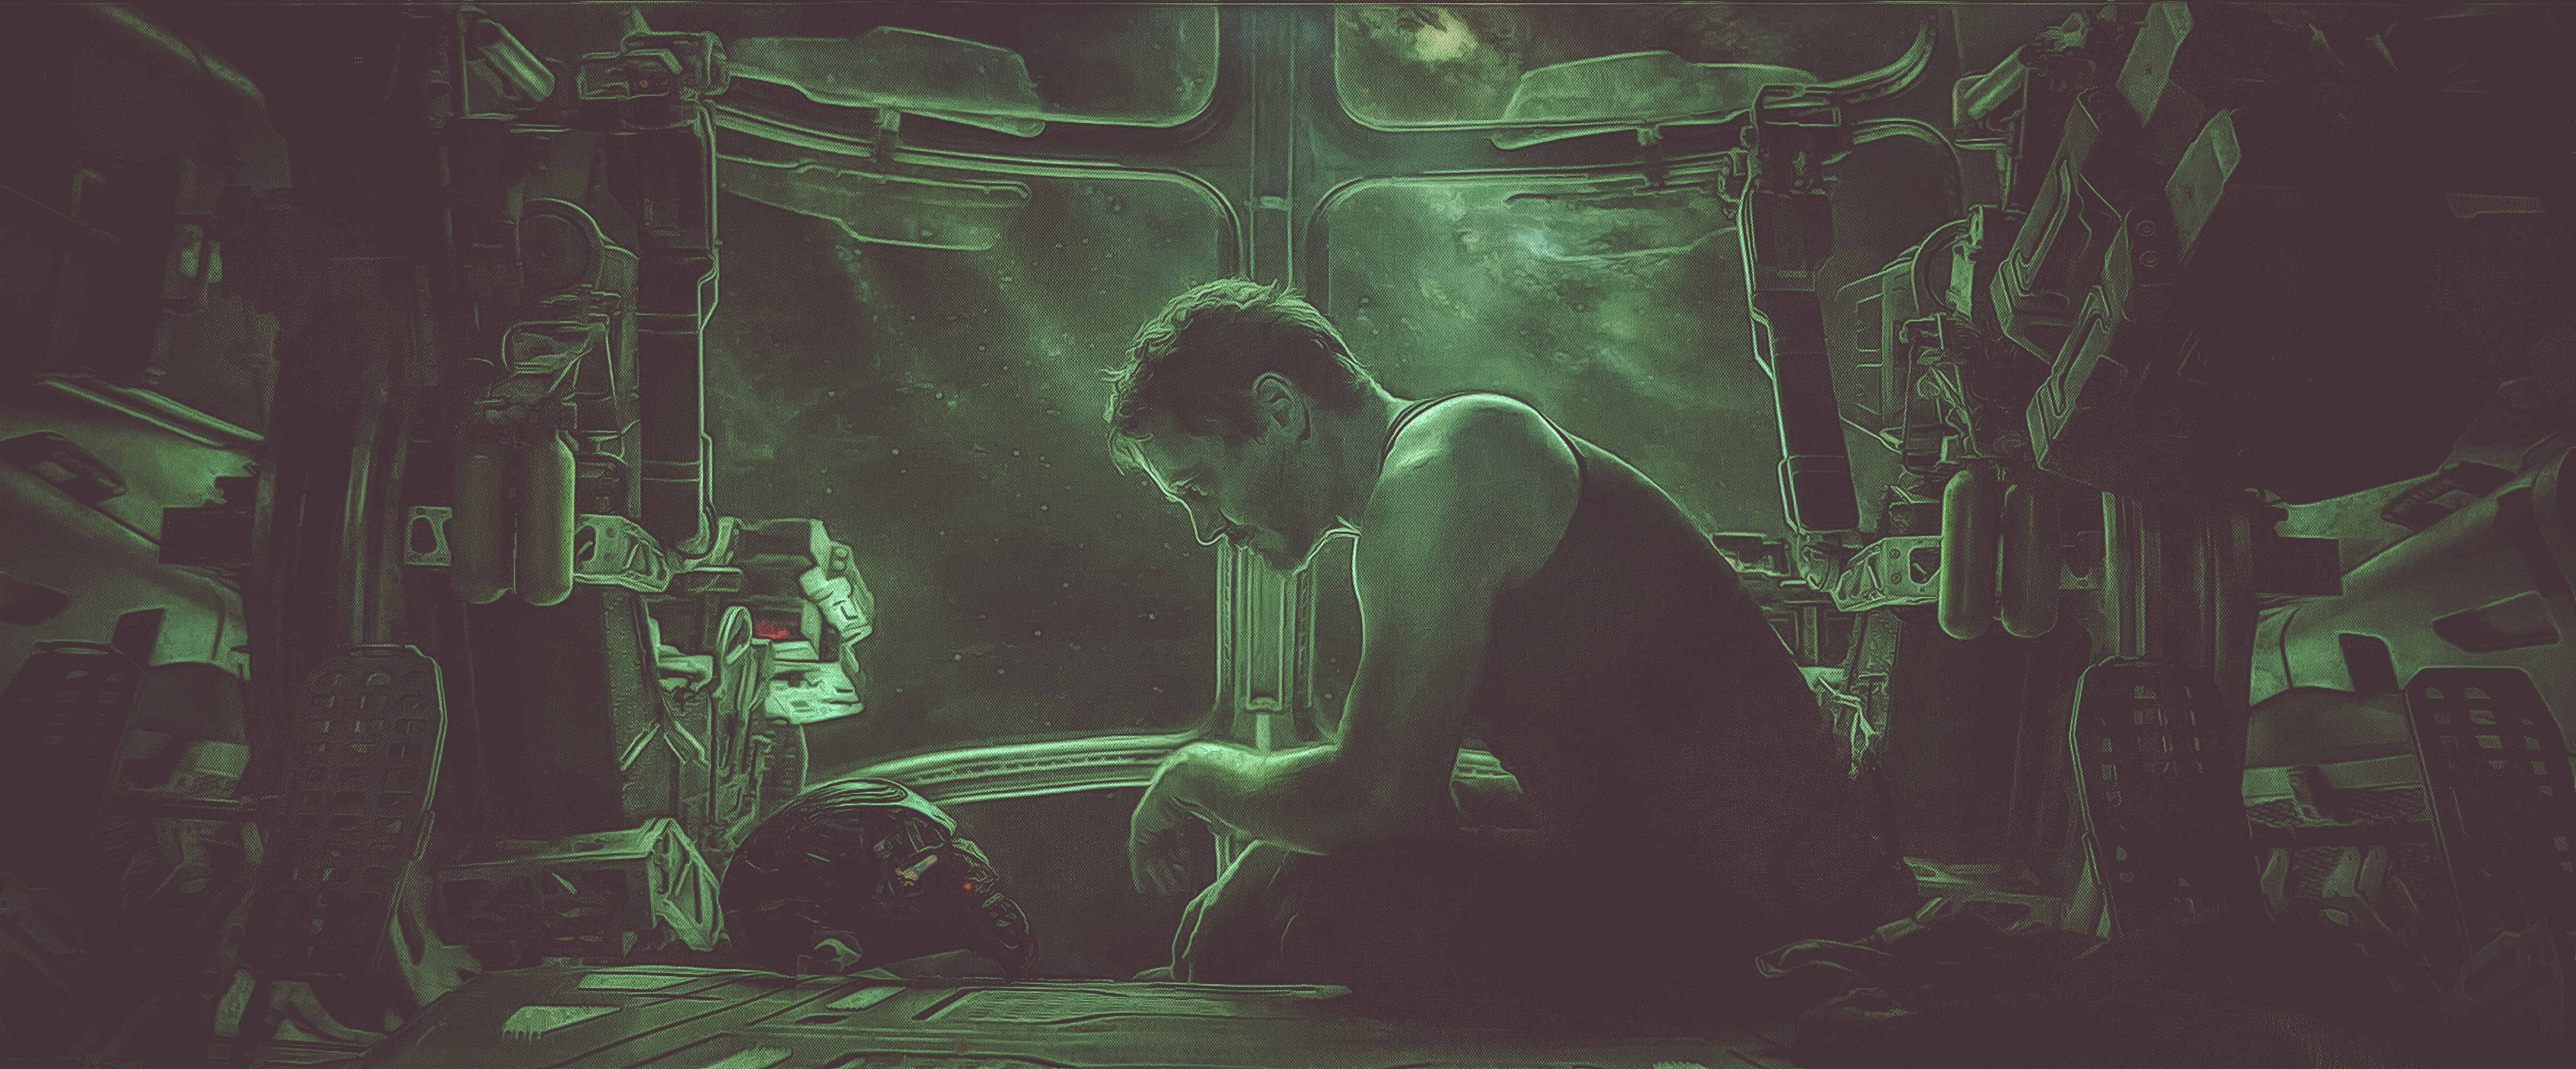 Tony Stark Lost in Space HD Wallpaper Background Image